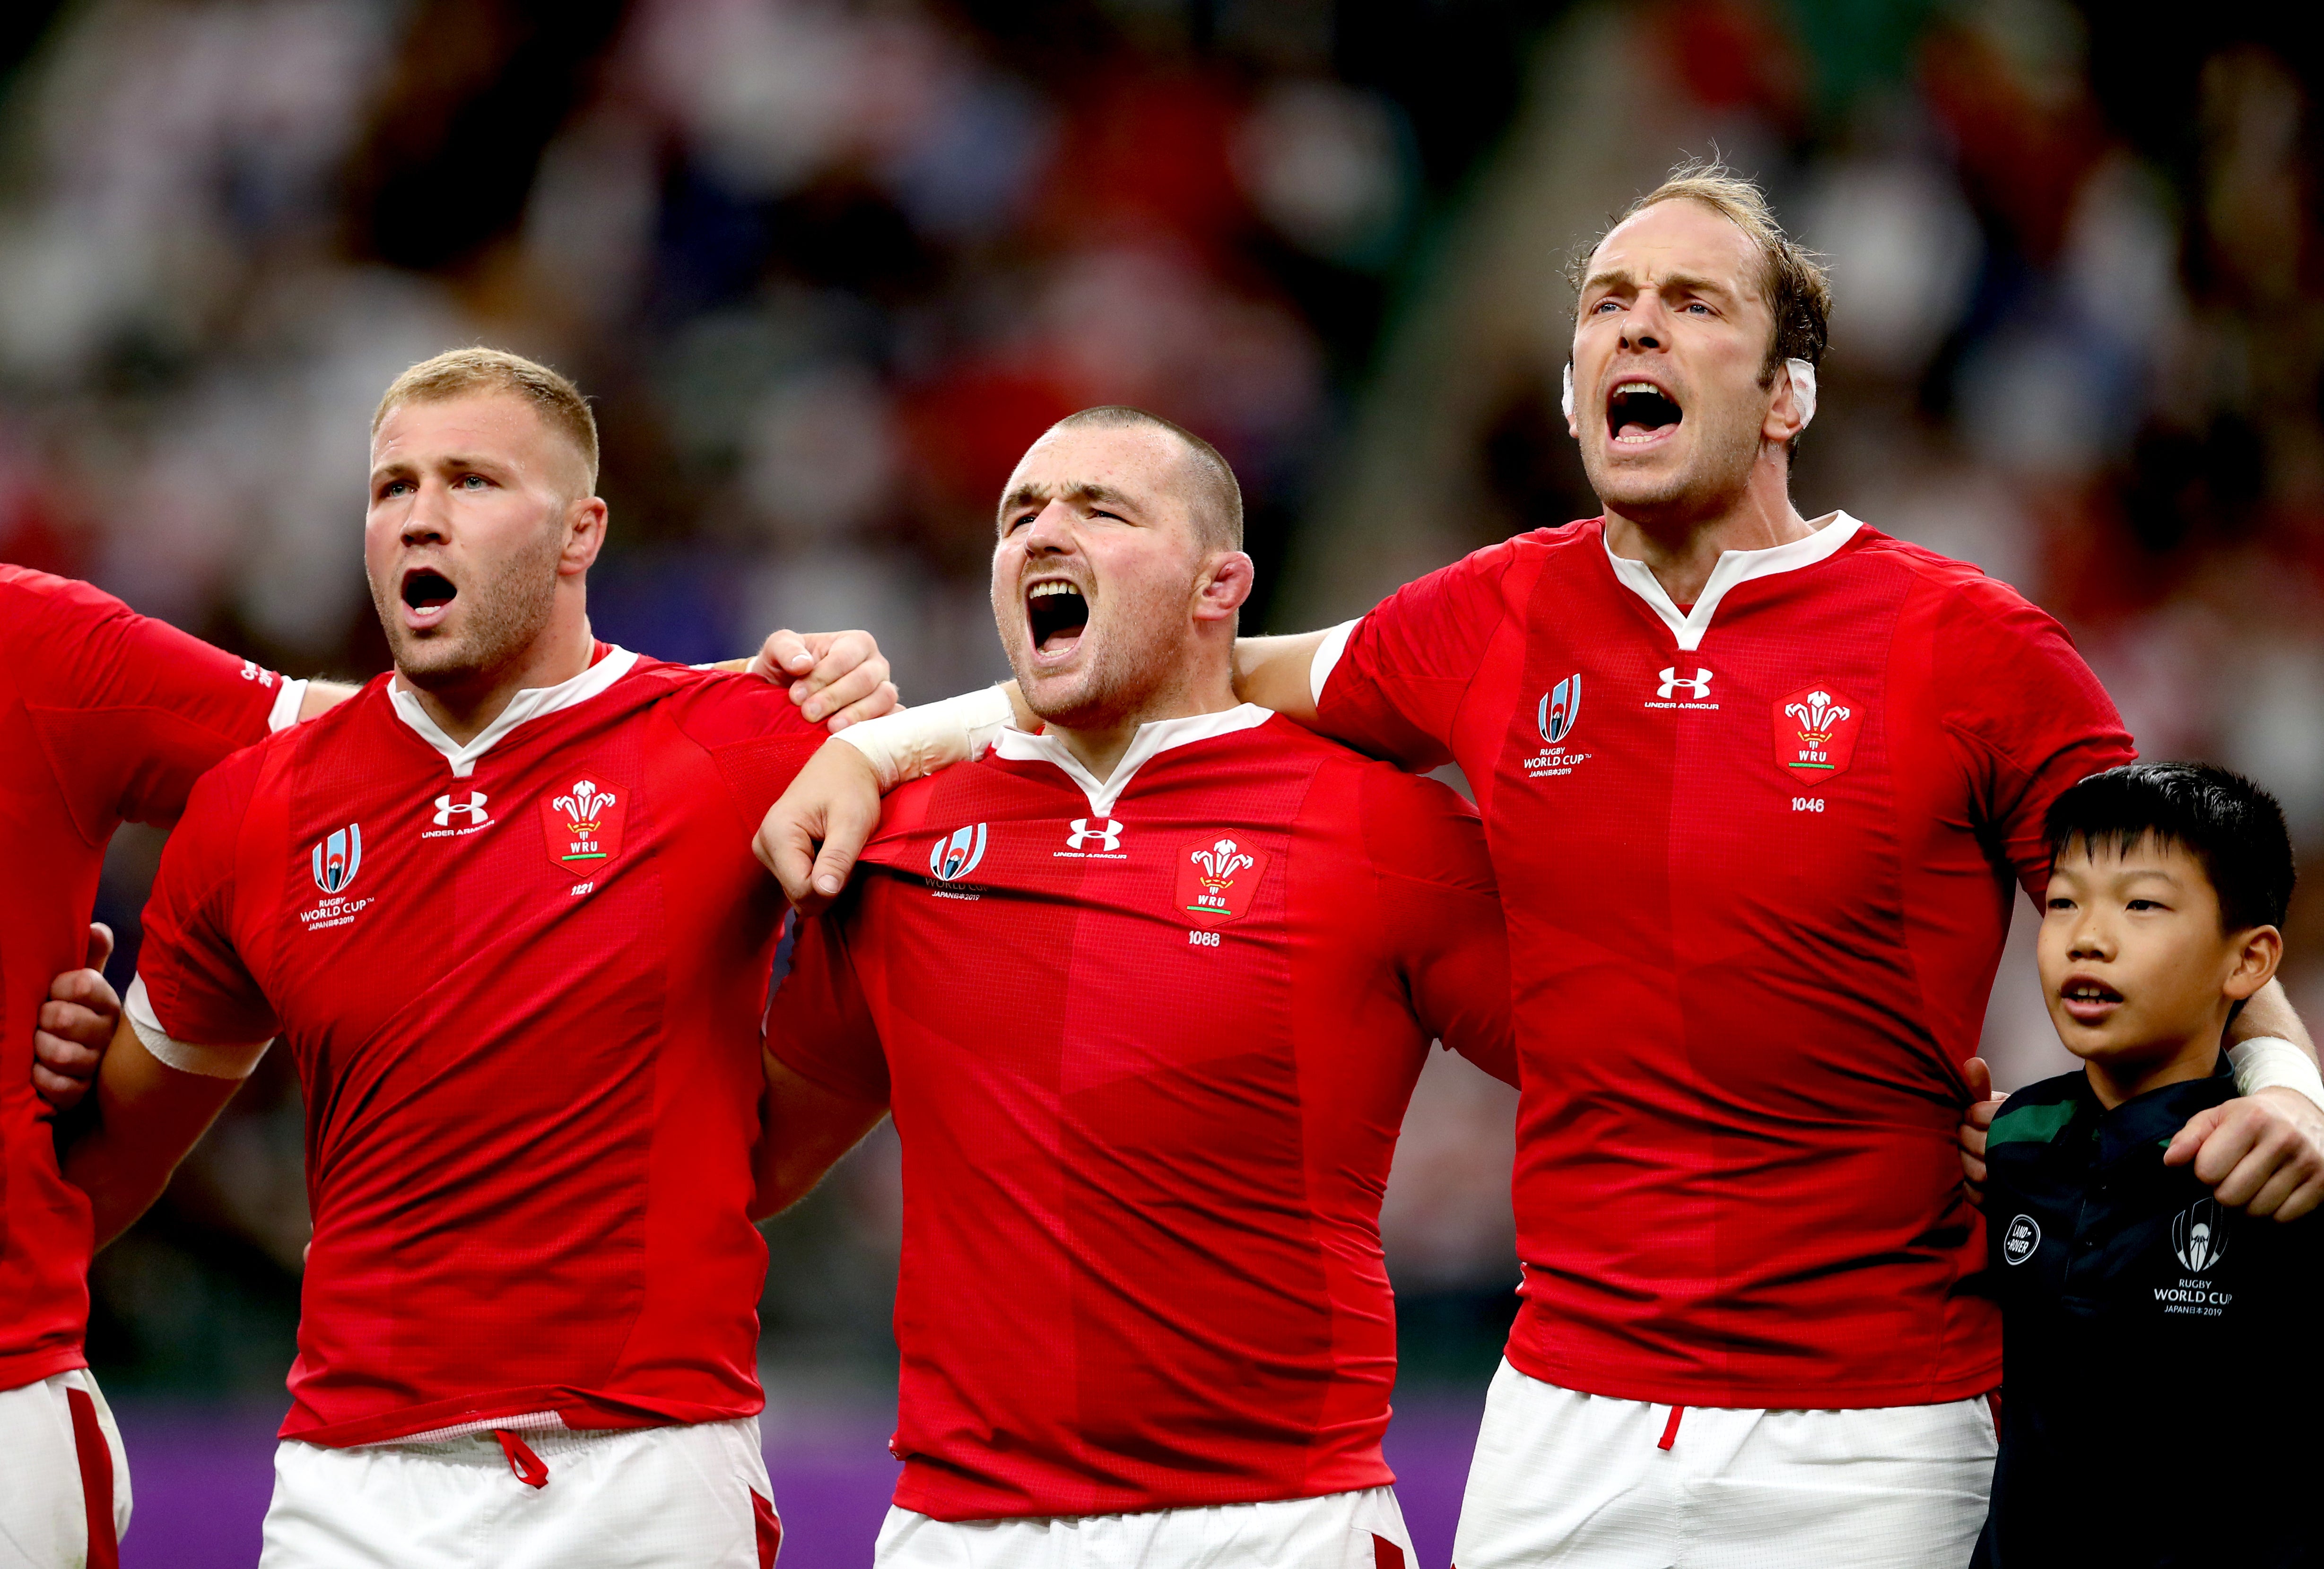 Ken Owens and Alun Wyn Jones sing the Welsh anthem during the 2019 World Cup